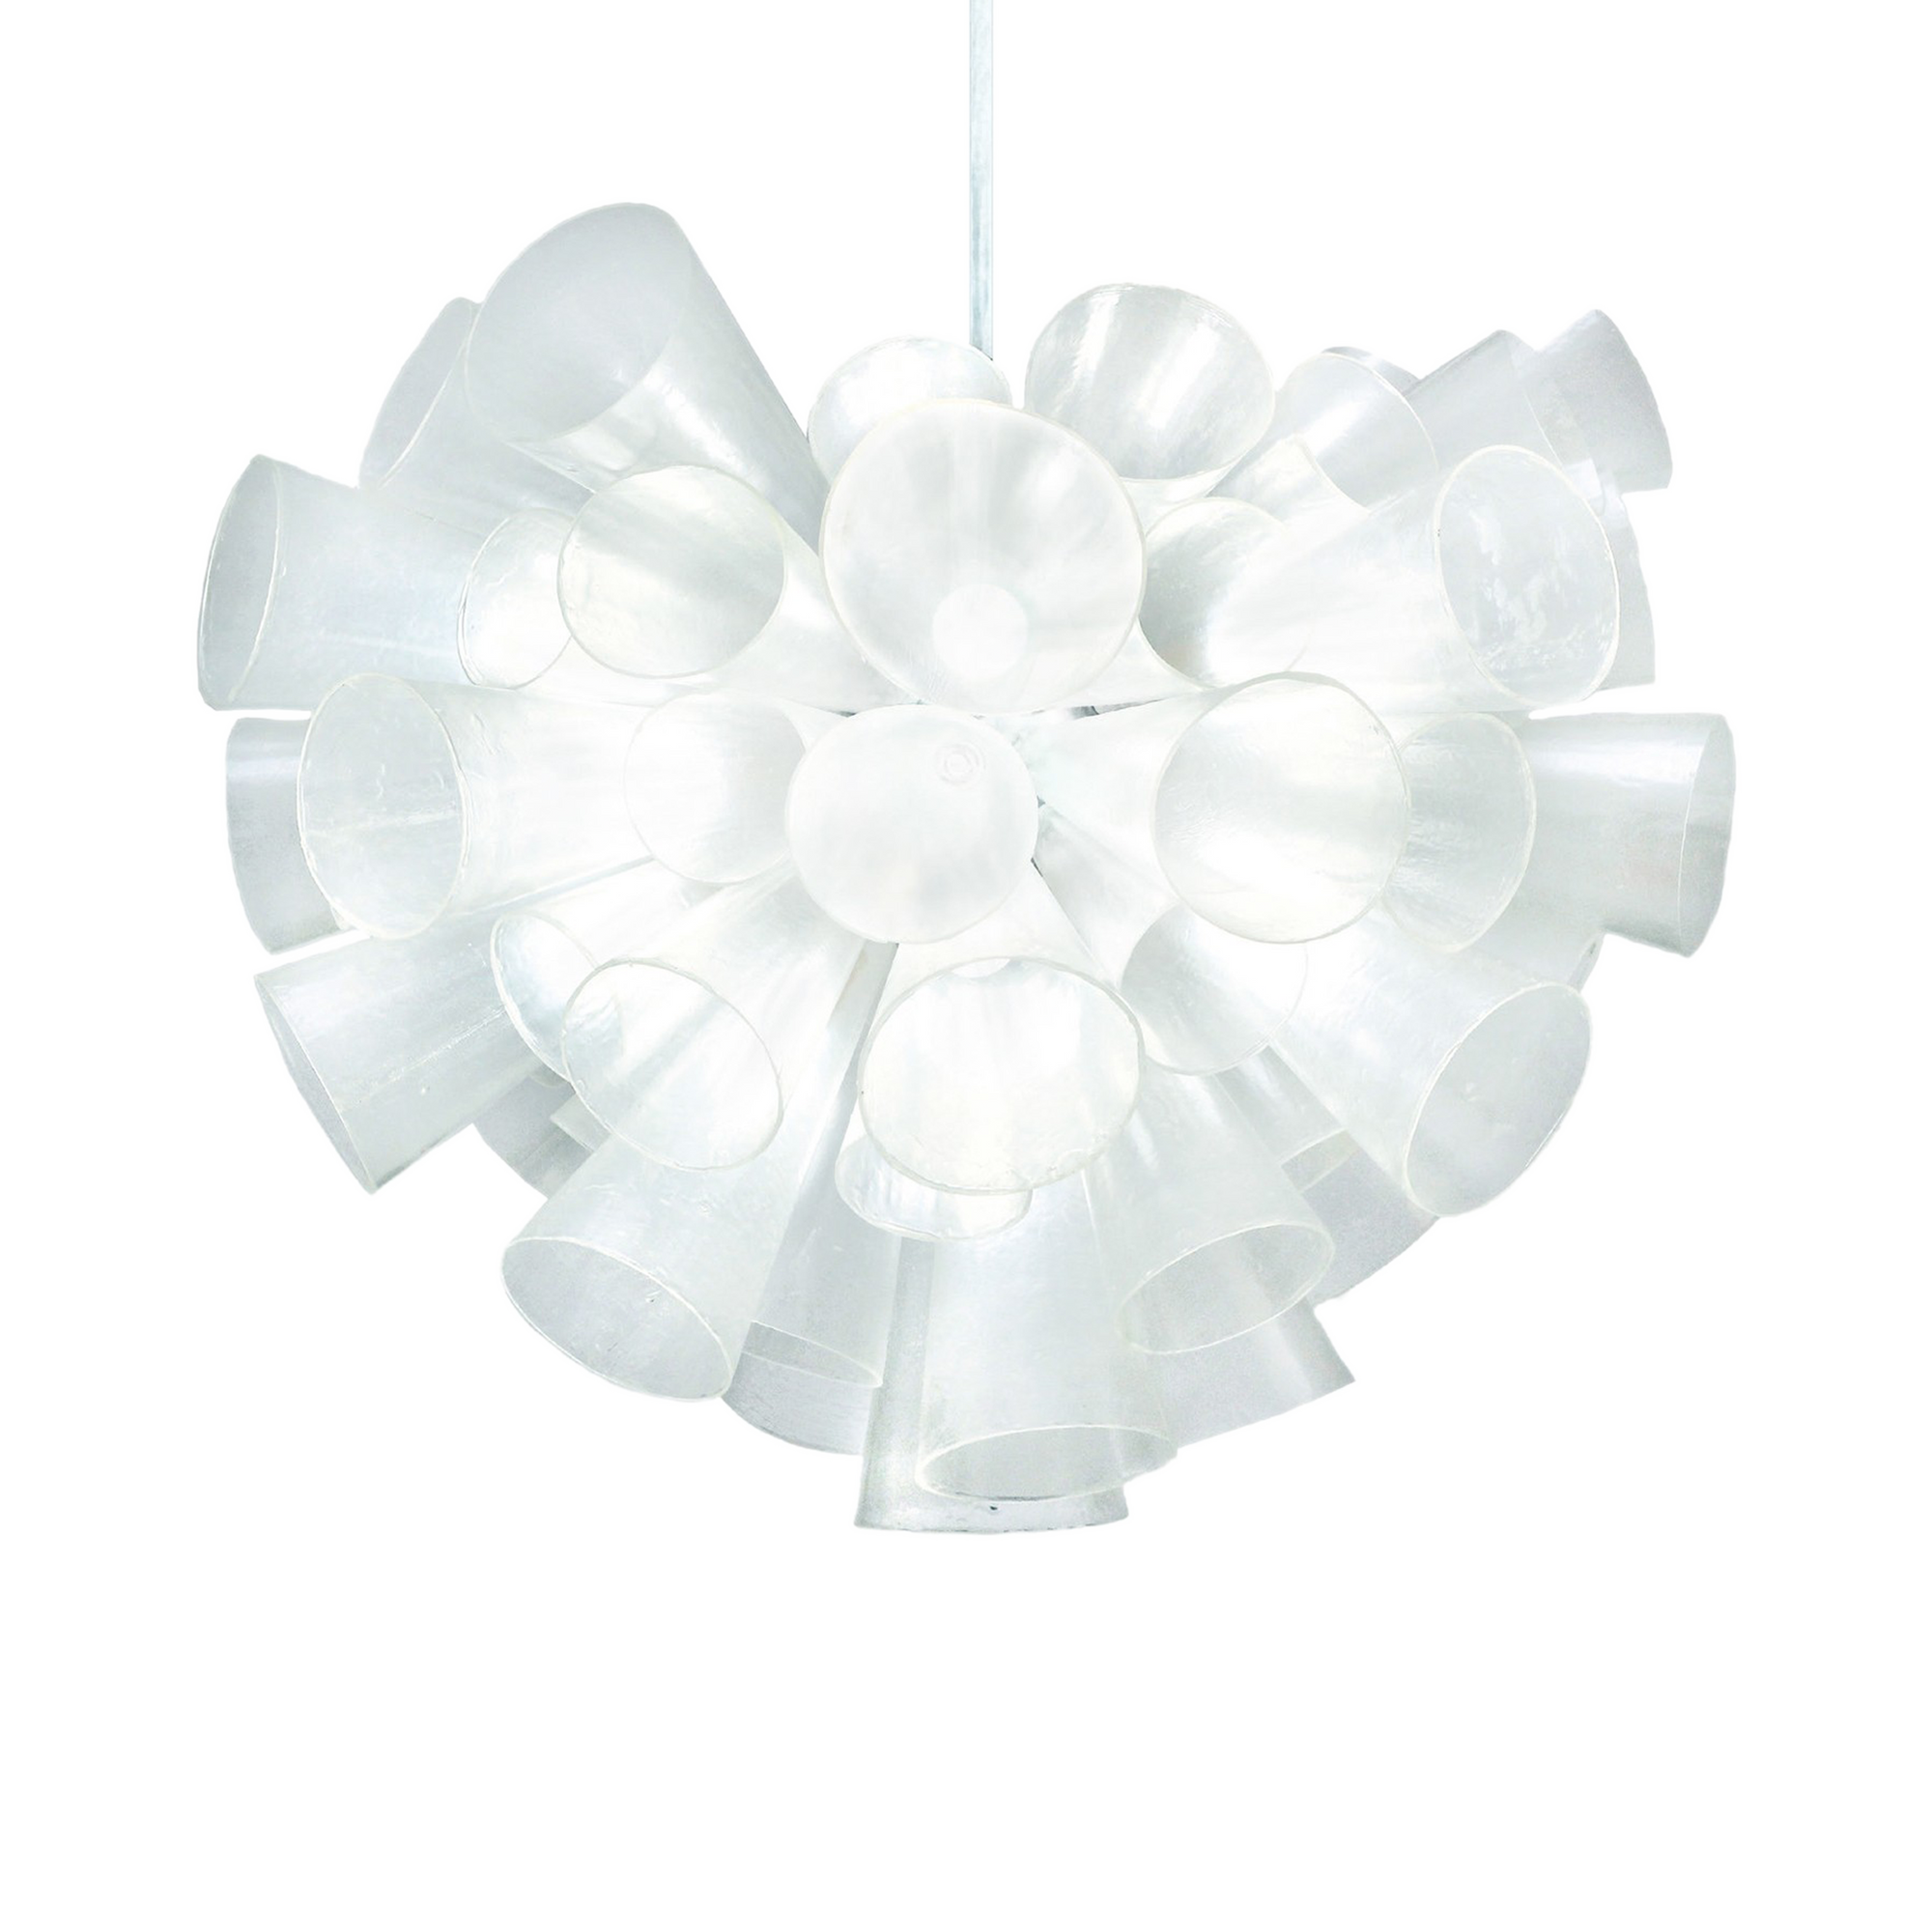 Crafted from cast resin, the Fanad chandelier features a radiating form made up of cones of various sizes, creating an eclectic shape and dynamic movement that will make a bold sta